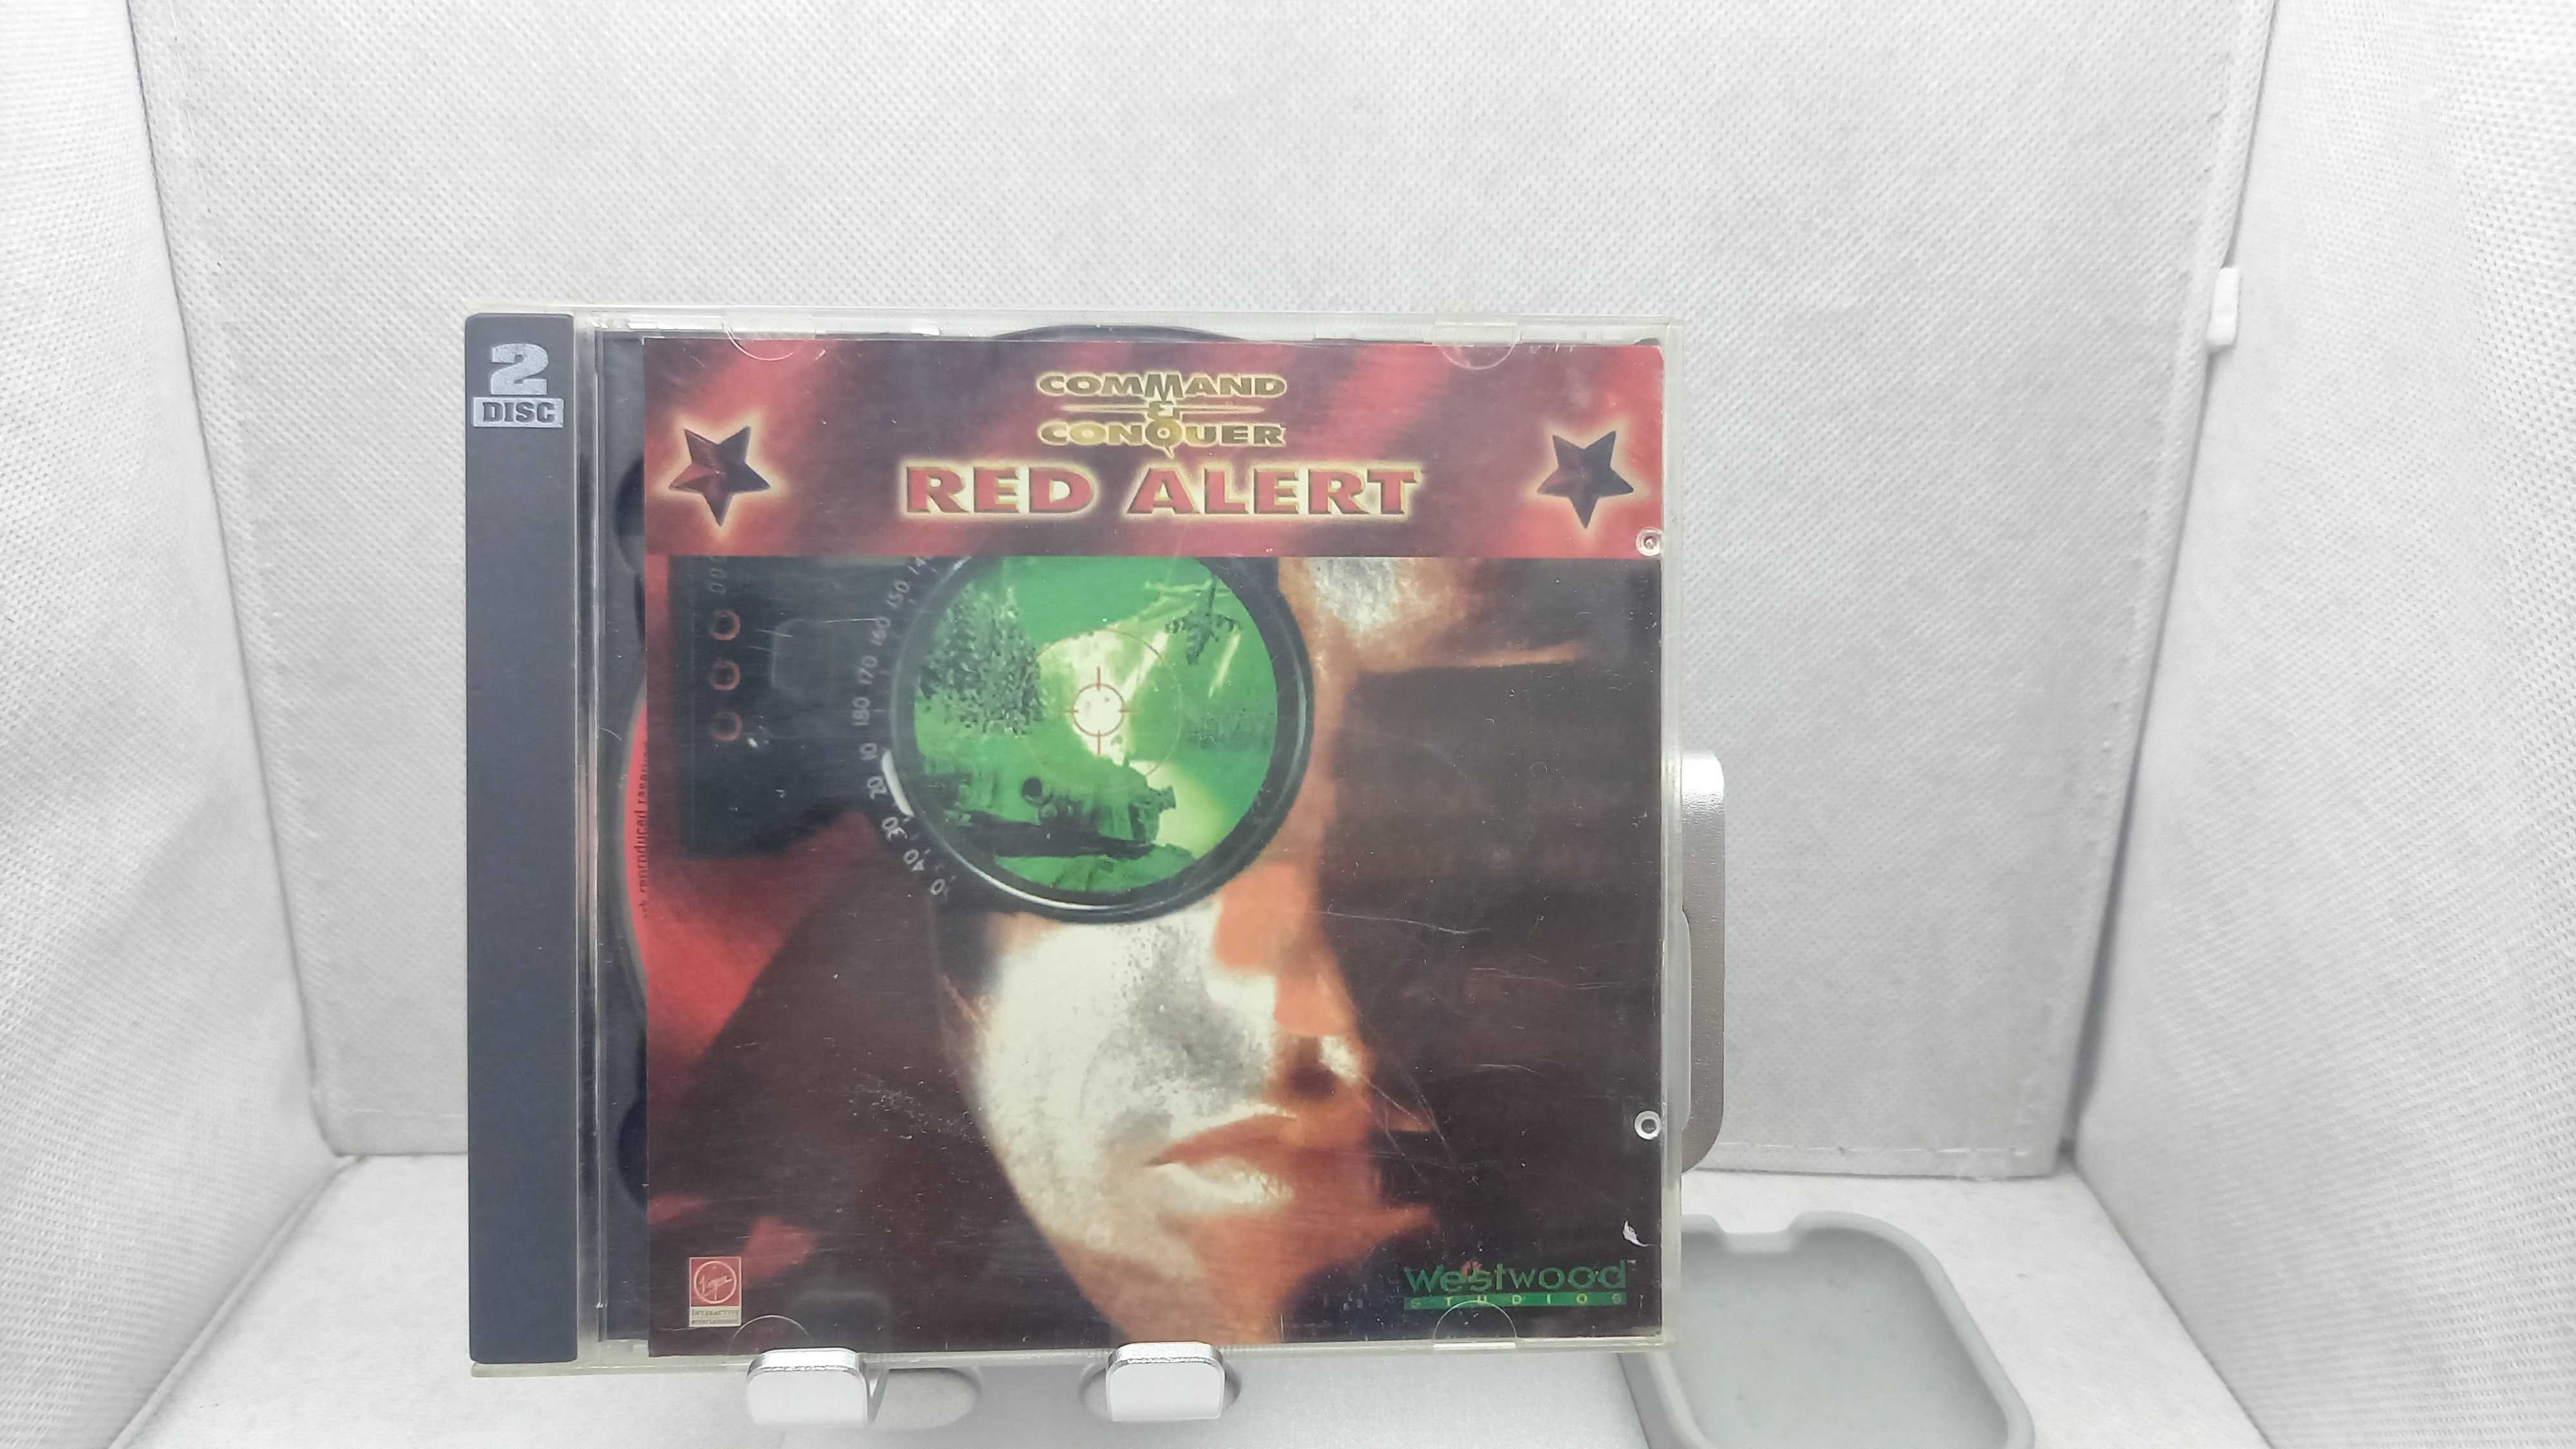 Red alert command & conquer